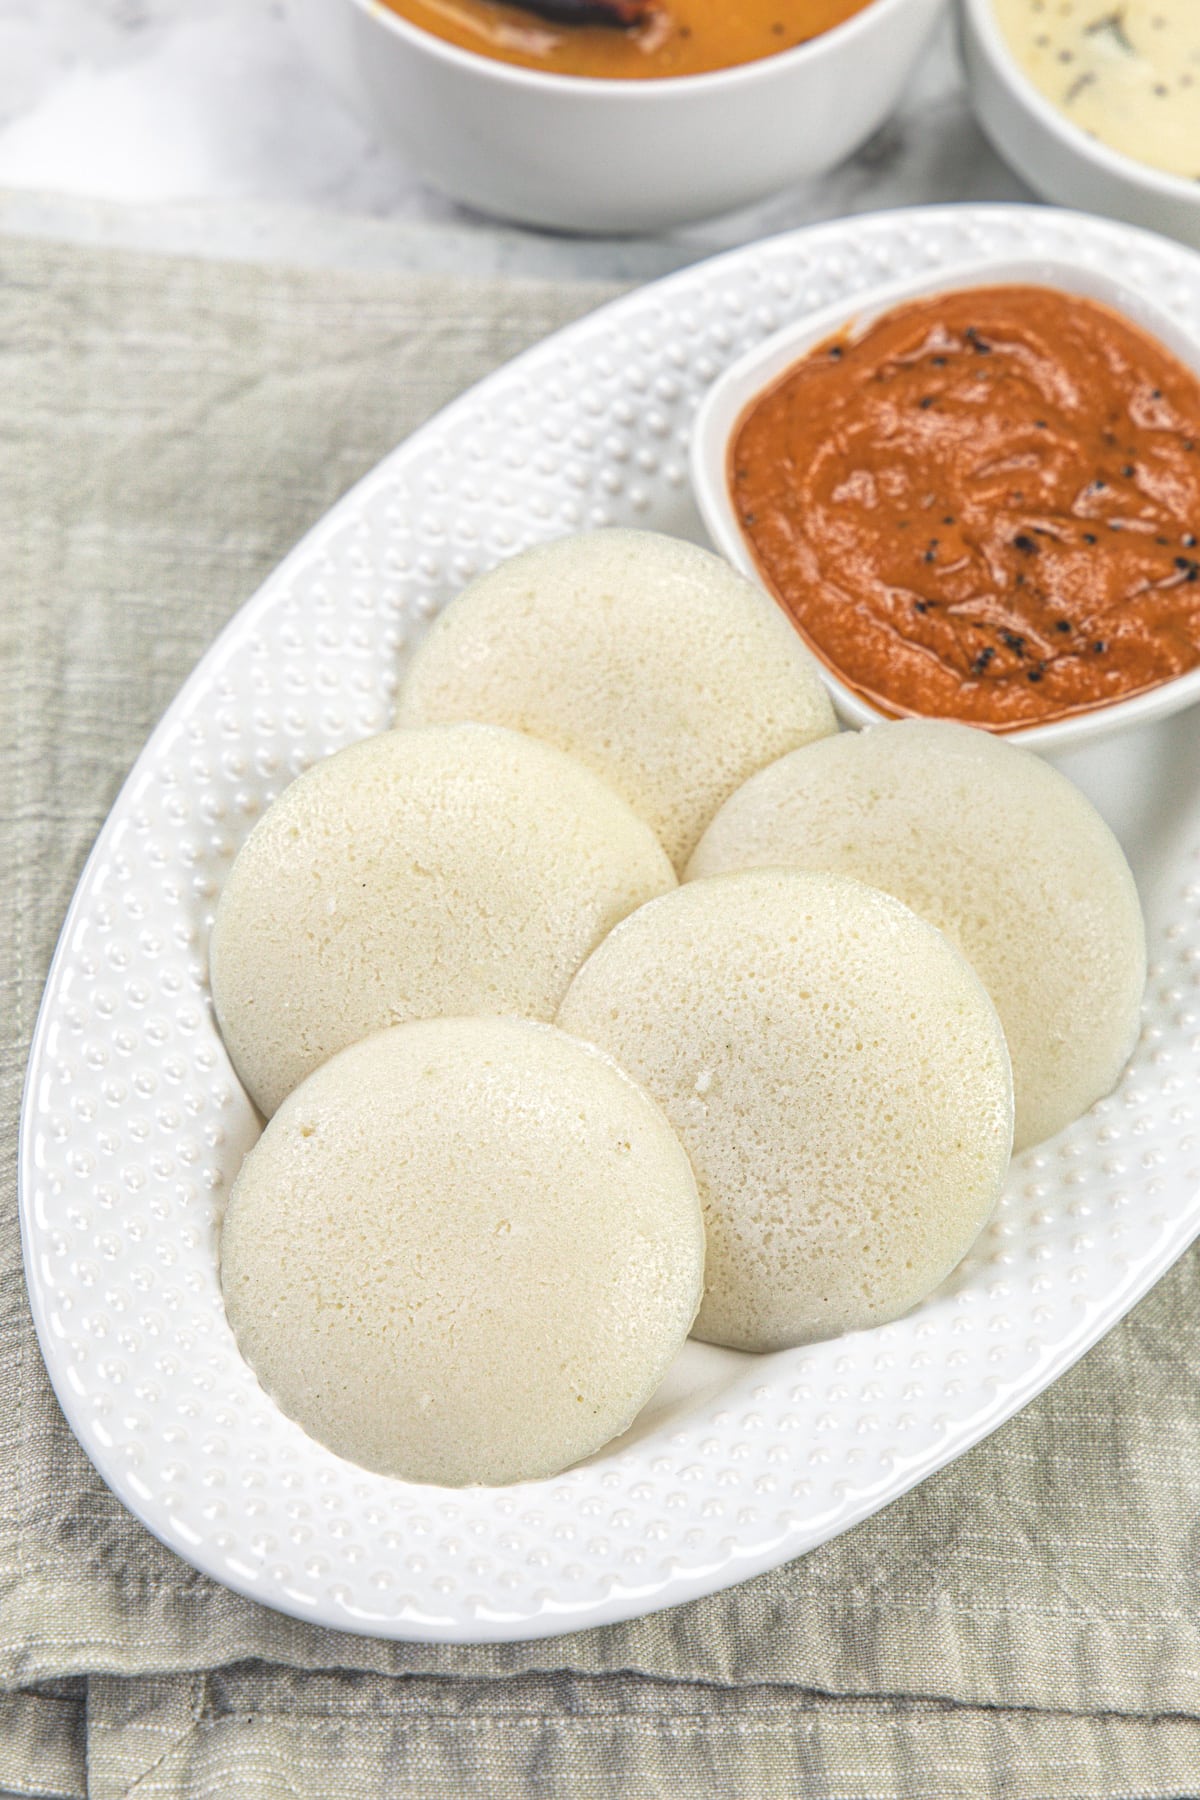 5 idli served with chutney in an oval plate.